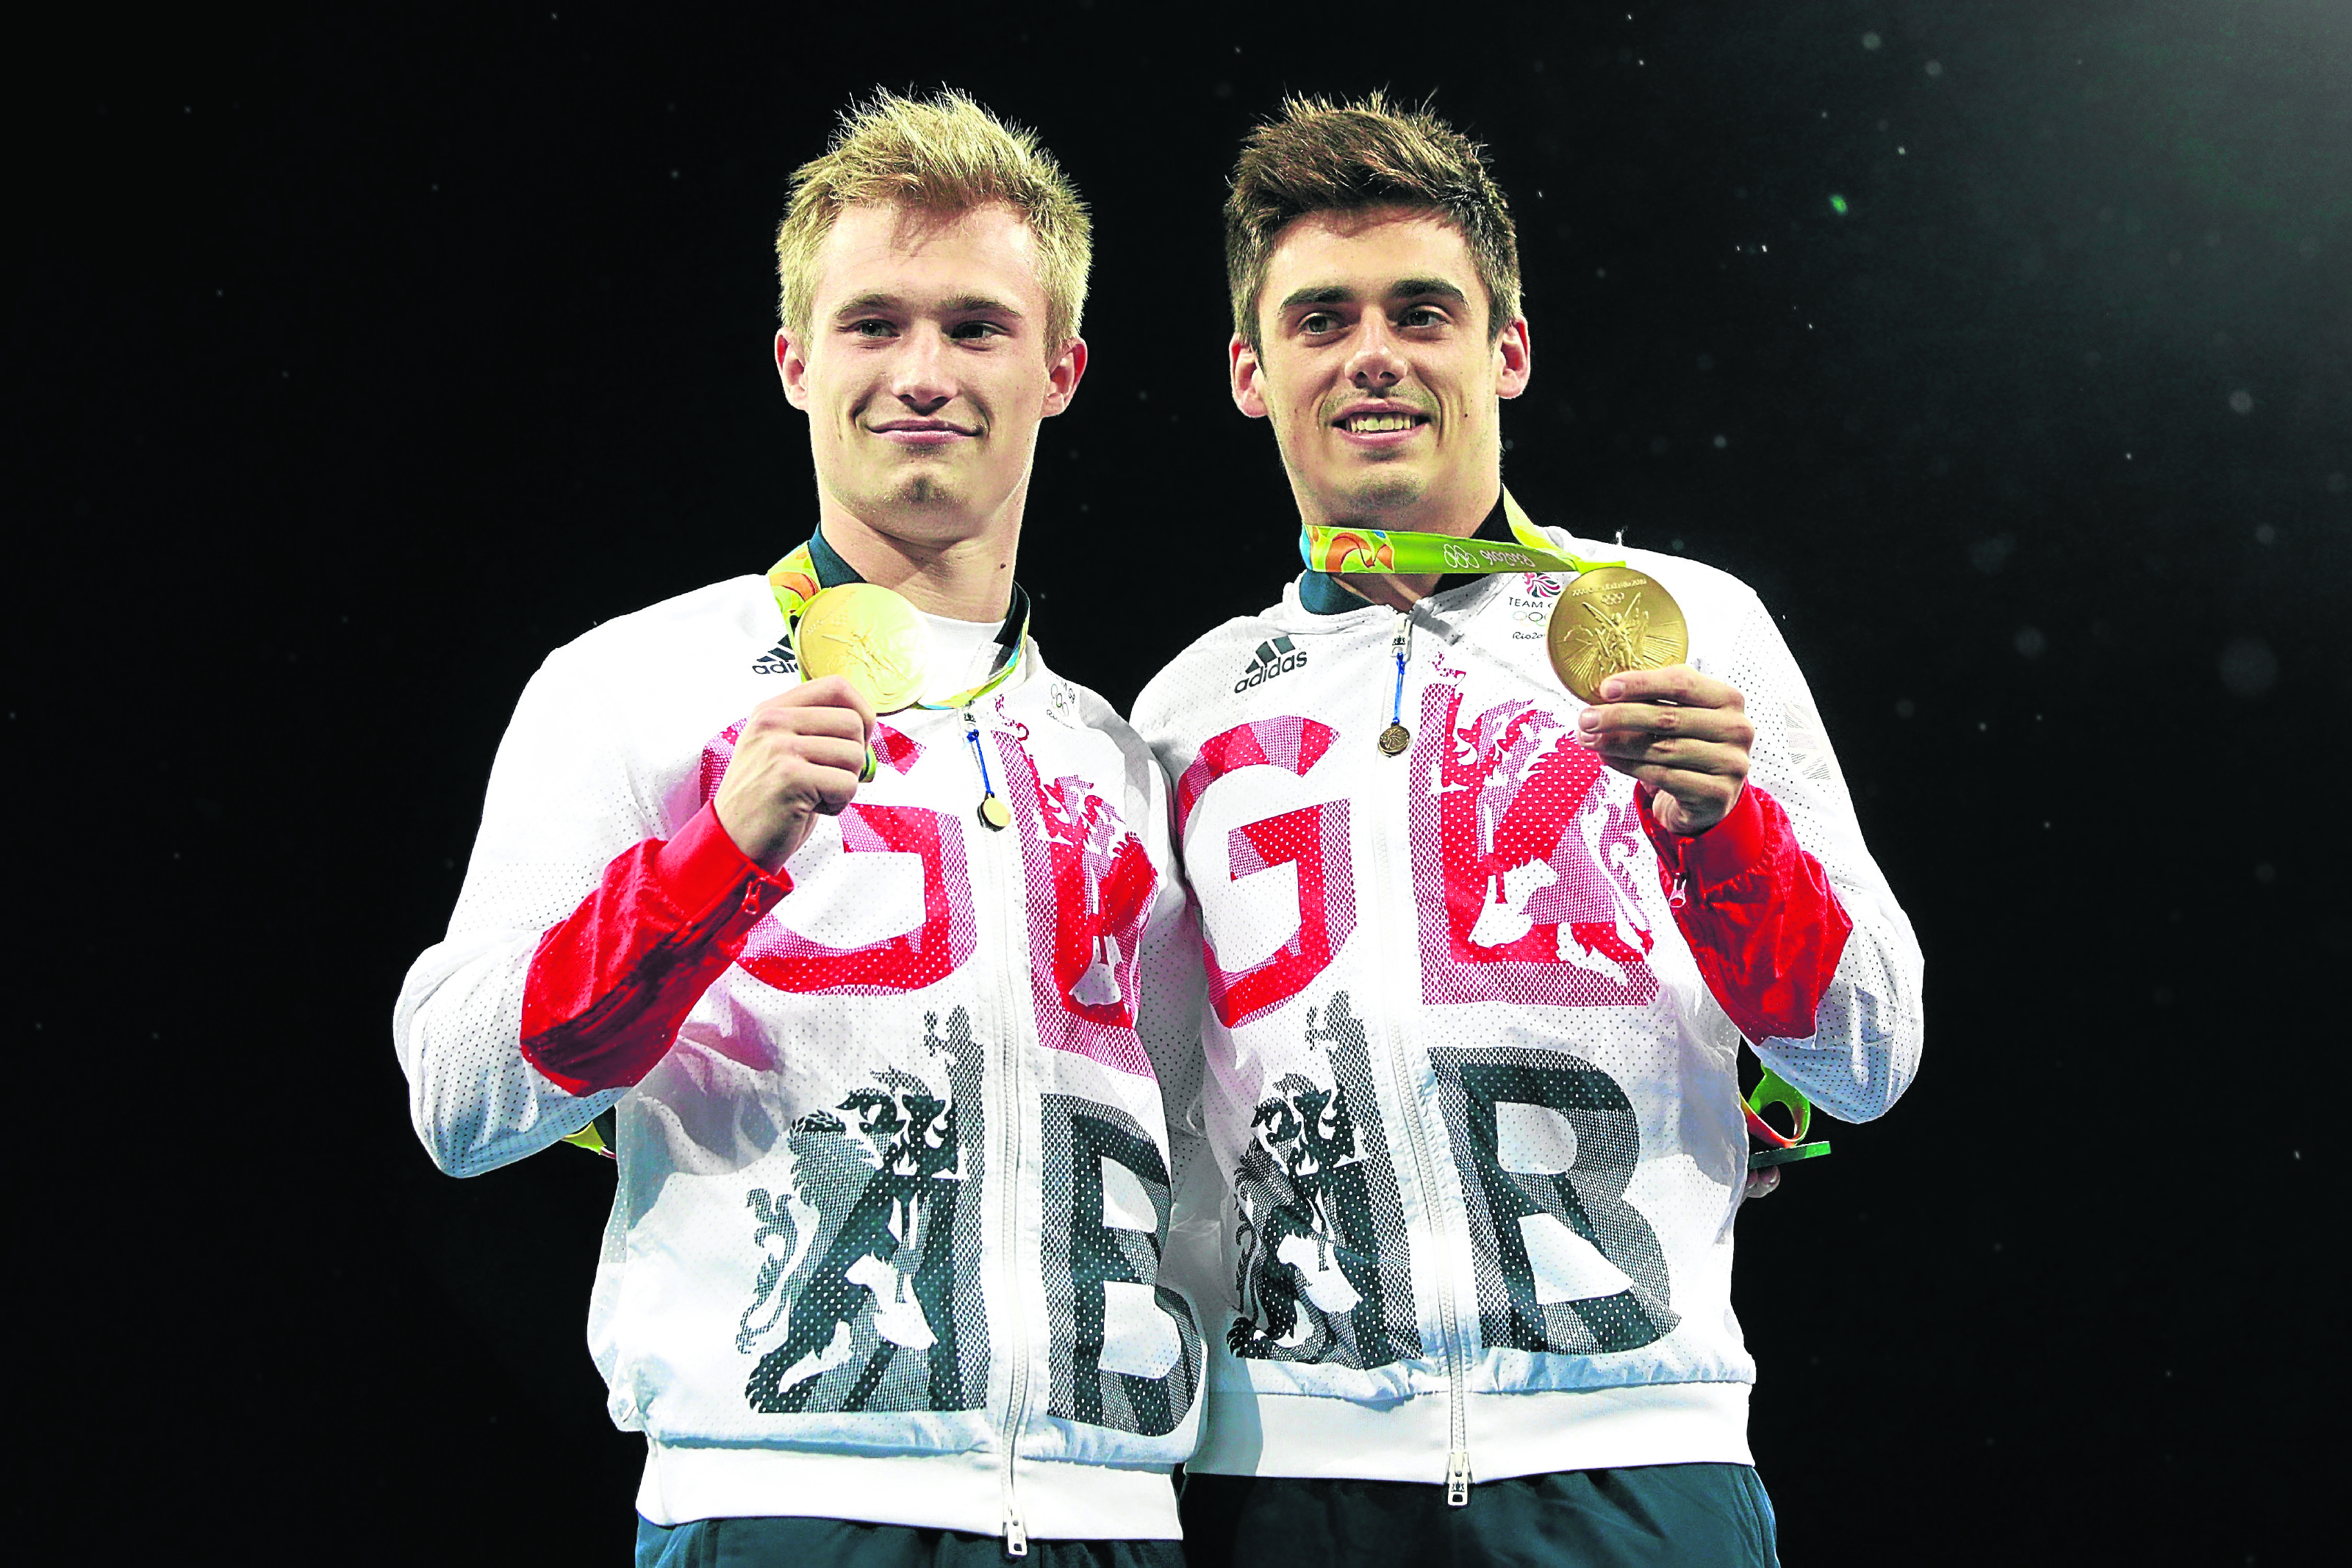 (L-R) Gold medalists Jack Laugher and Chris Mears of Great Britain pose during the medal ceremony for the Men's Diving Synchronised 3m Springboard Final (Photo by Adam Pretty/Getty Images)